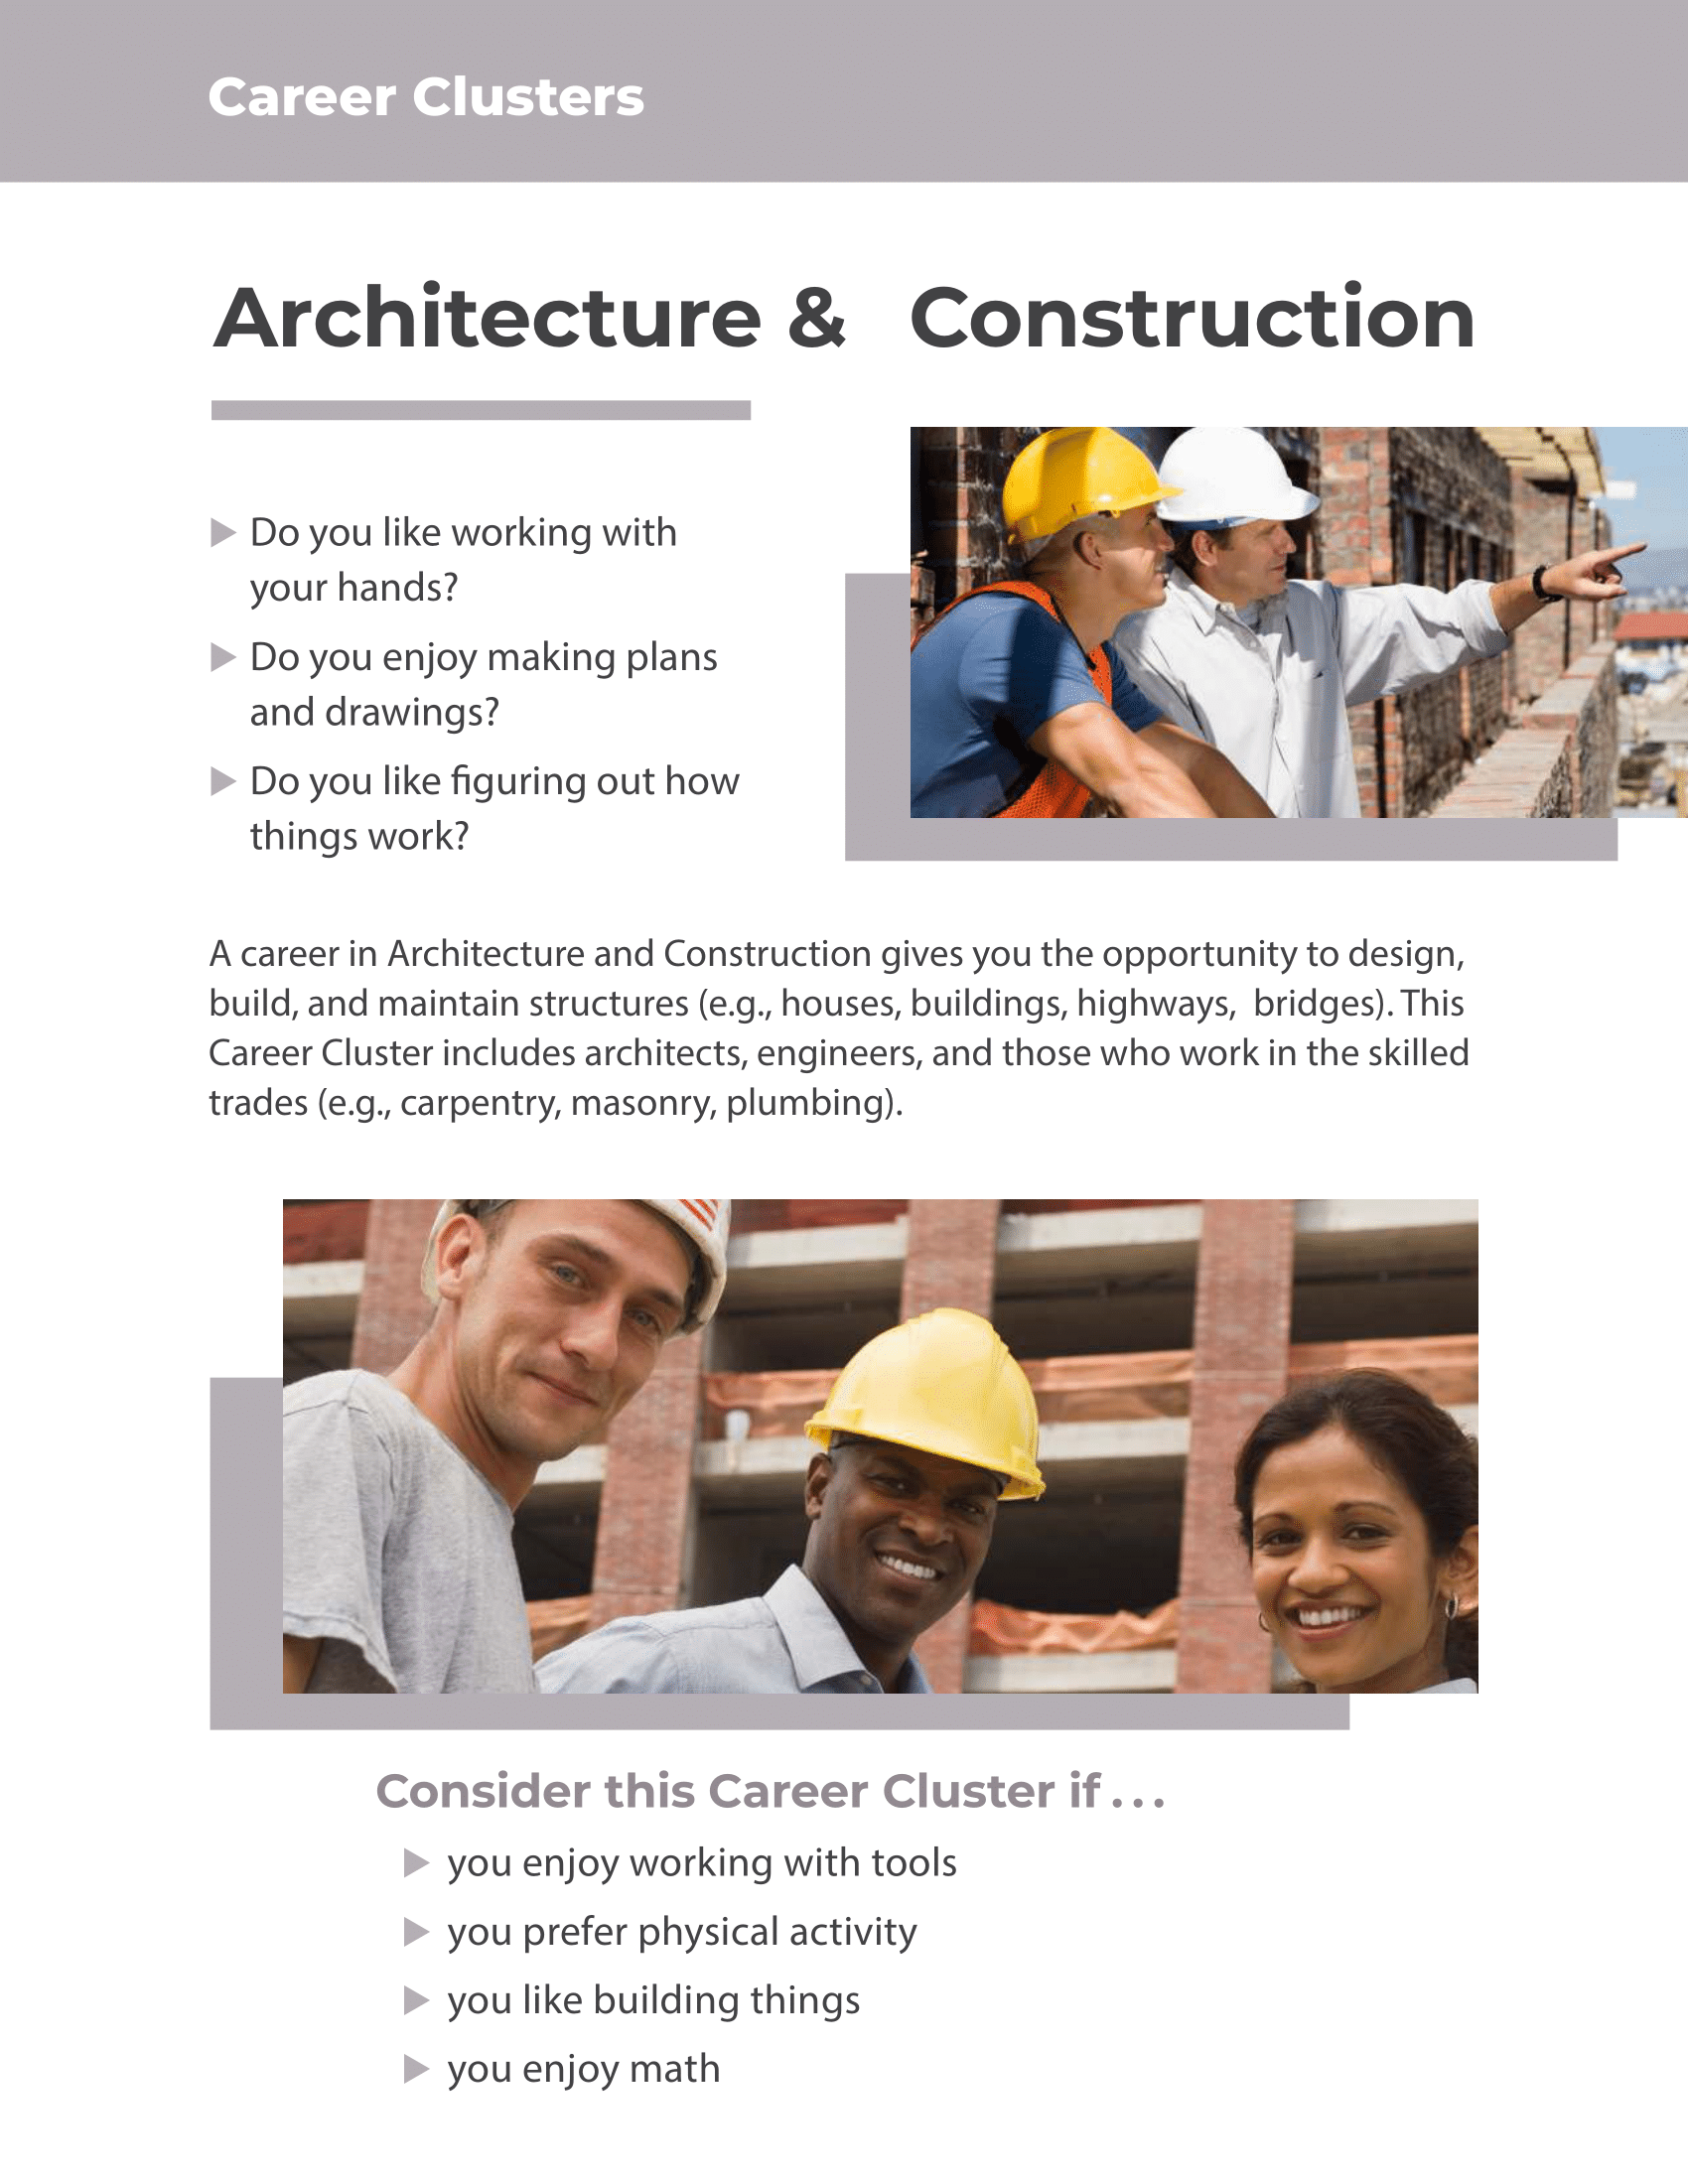 Career Clusters - Architecture and Construction